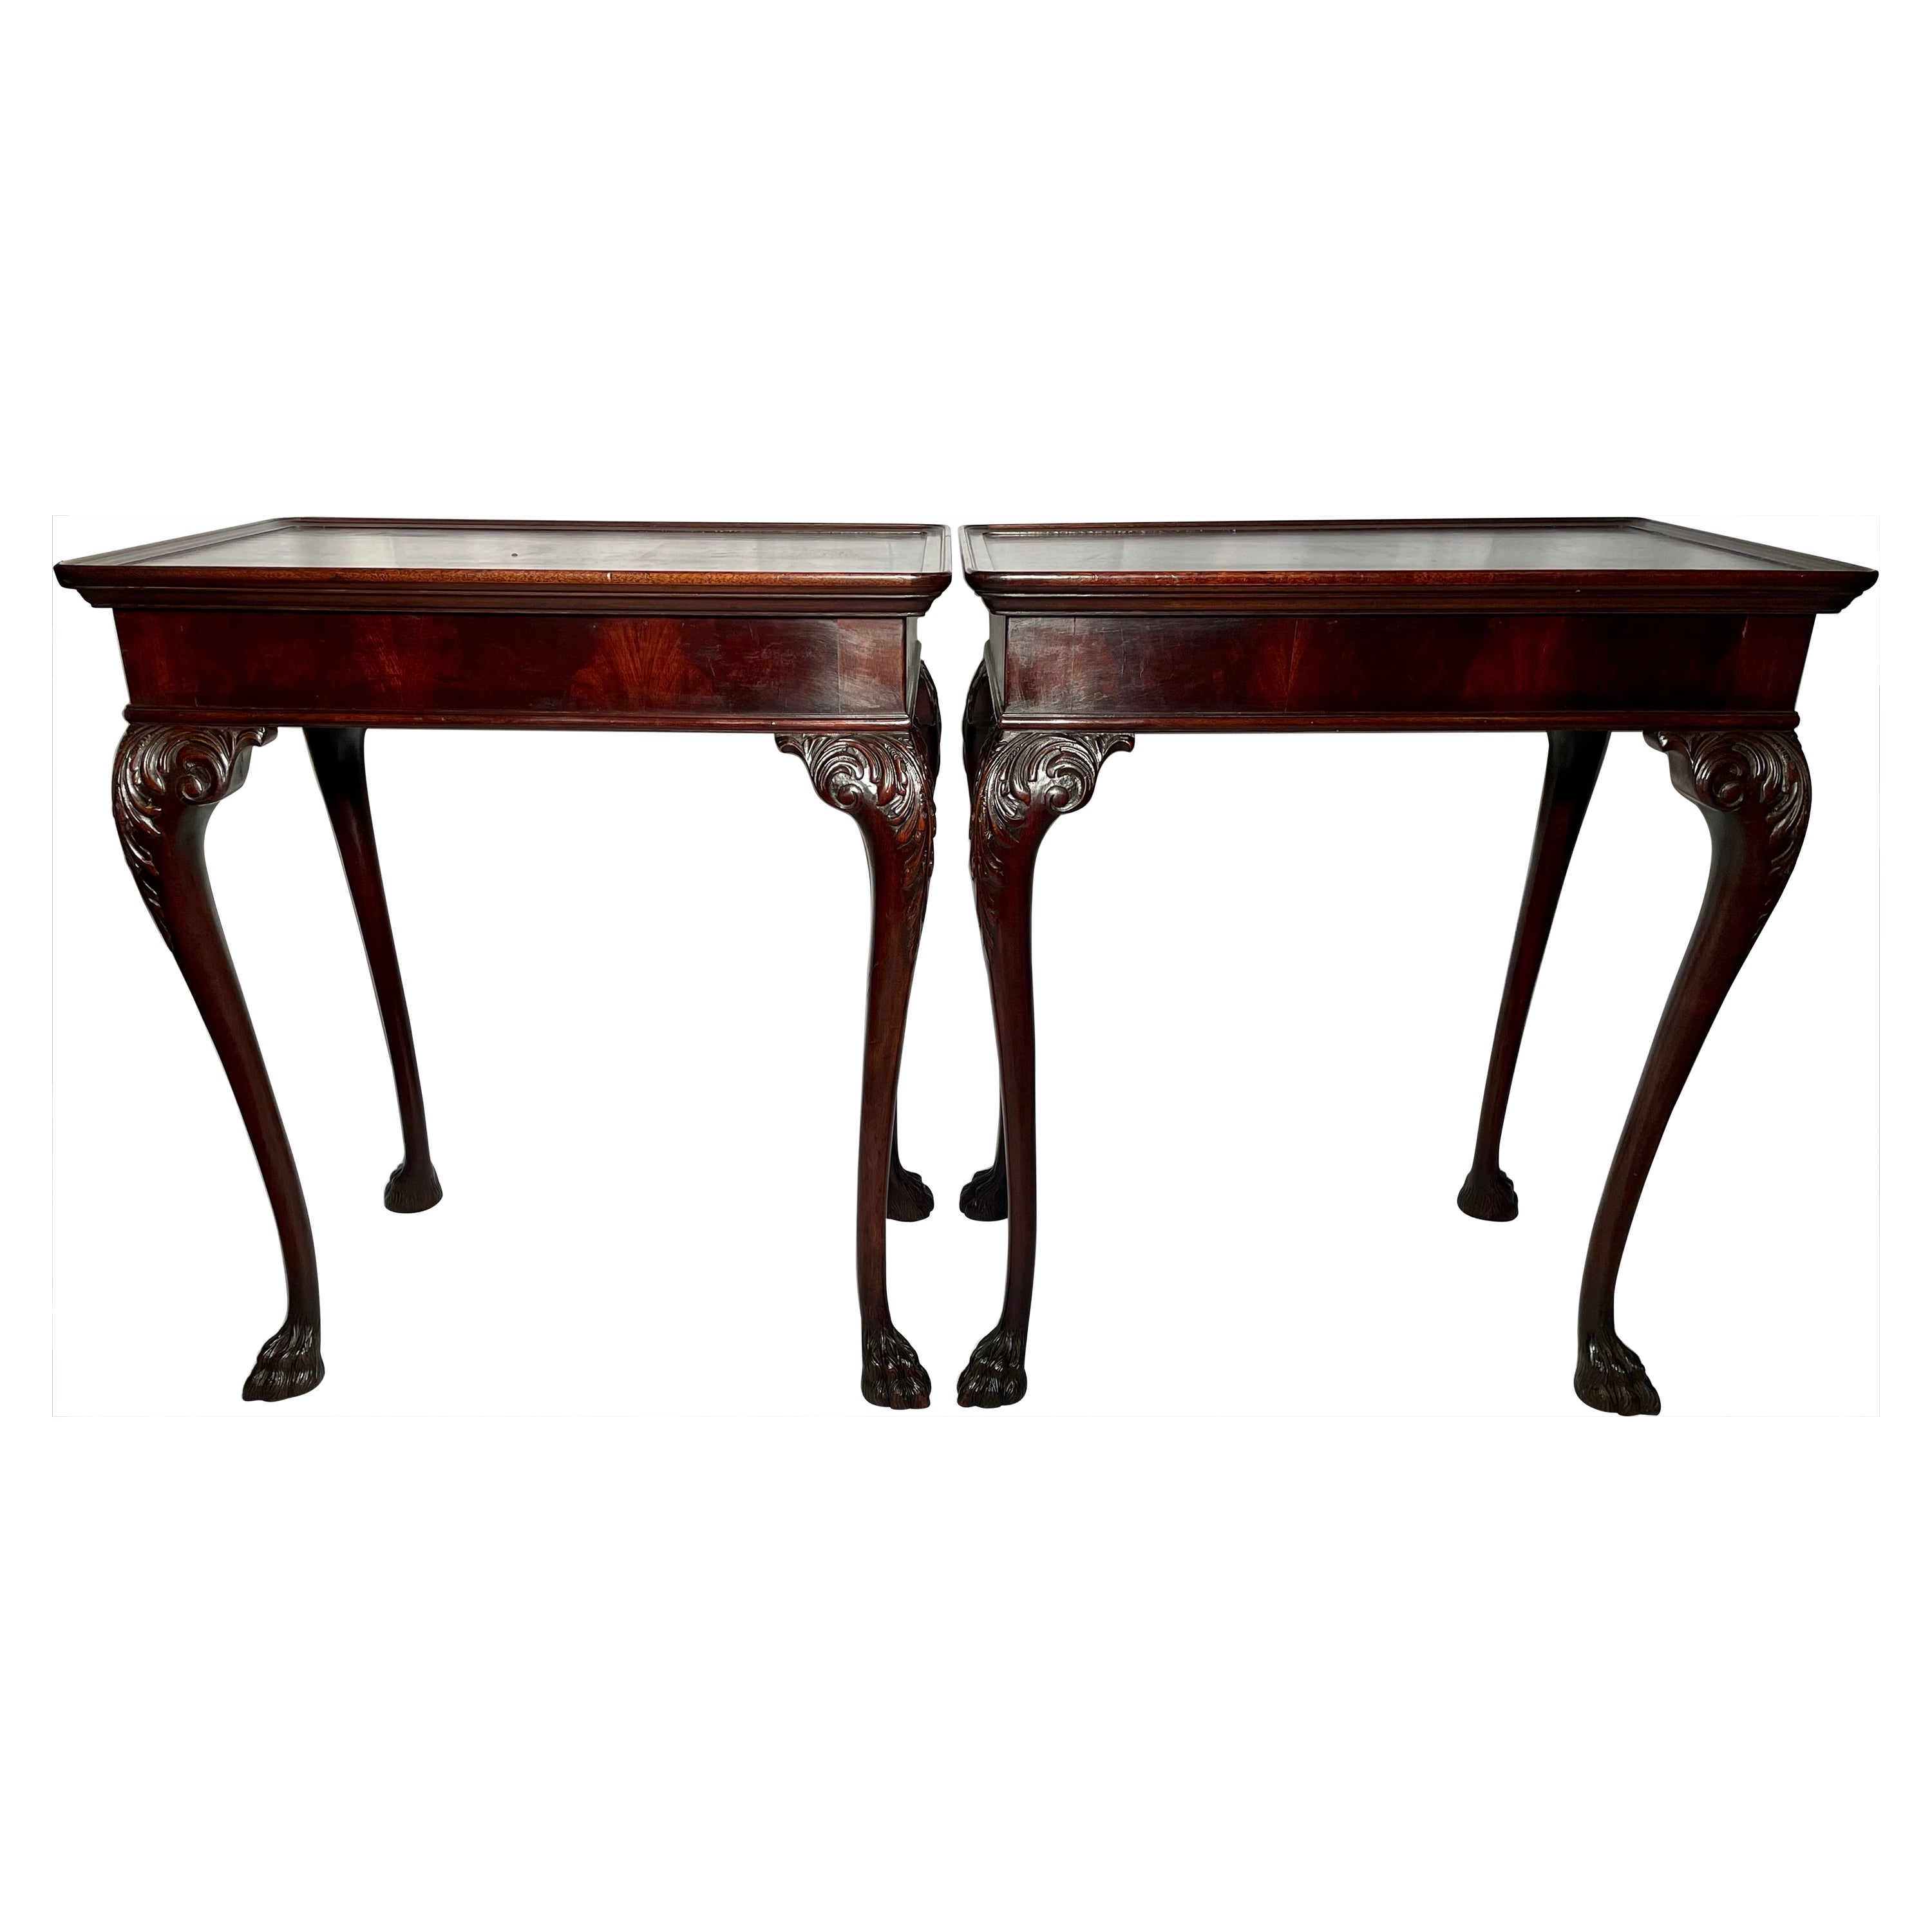 Pair Antique English Chippendale Carved Mahogany Side Tables, circa 1890s For Sale